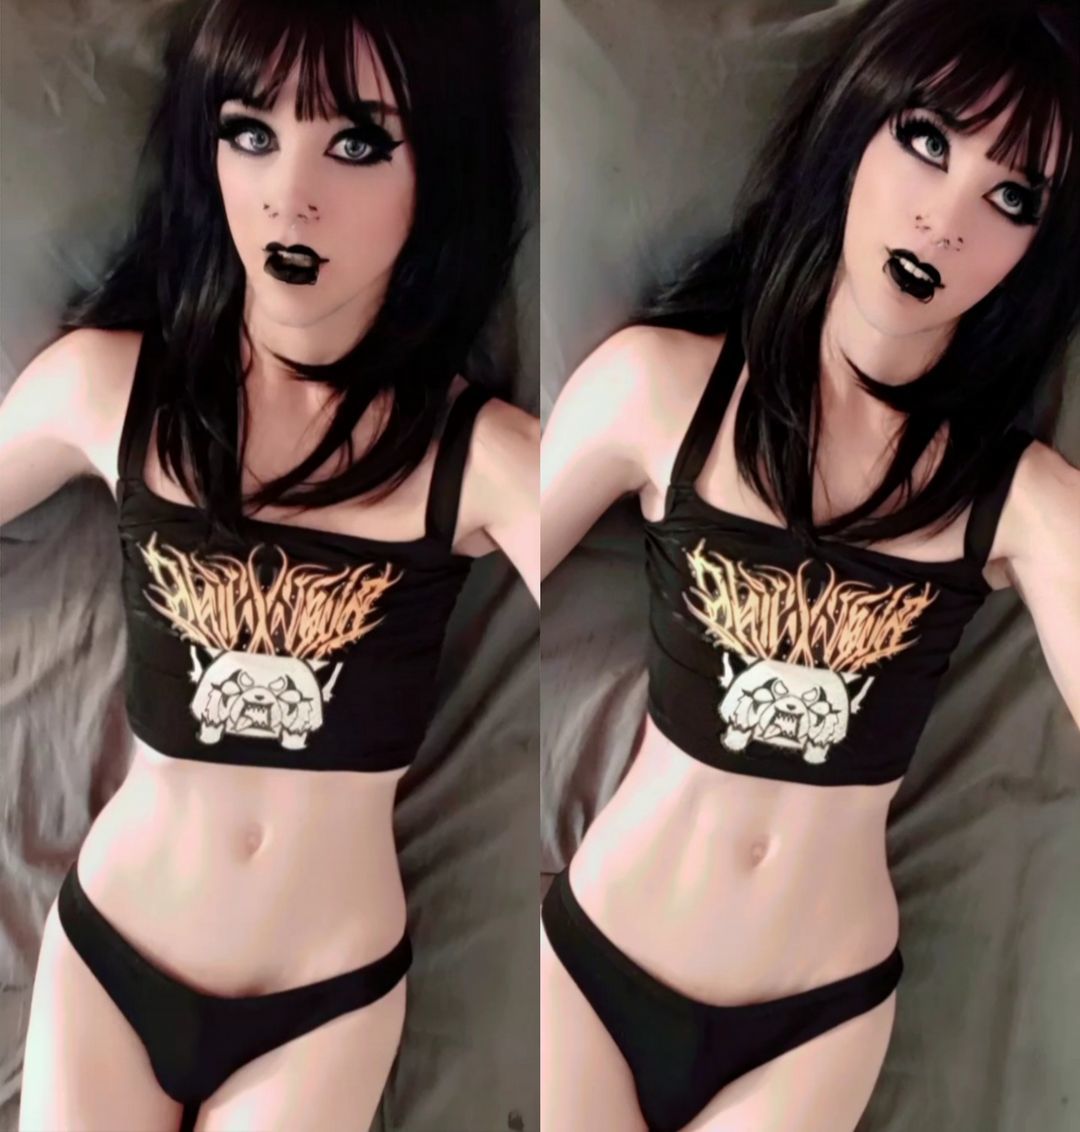 U / skyesoprettyy compilation (watch out! Very long post) - NSFW, Its a trap!, Erotic, Booty, Penis, Anus, Stockings, Ahegao, Trap IRL, Knee socks, Tights, Goths, Without underwear, Nudity, Mitts, Gaiters, Femboy, A selection, Collar, Choker, Longpost